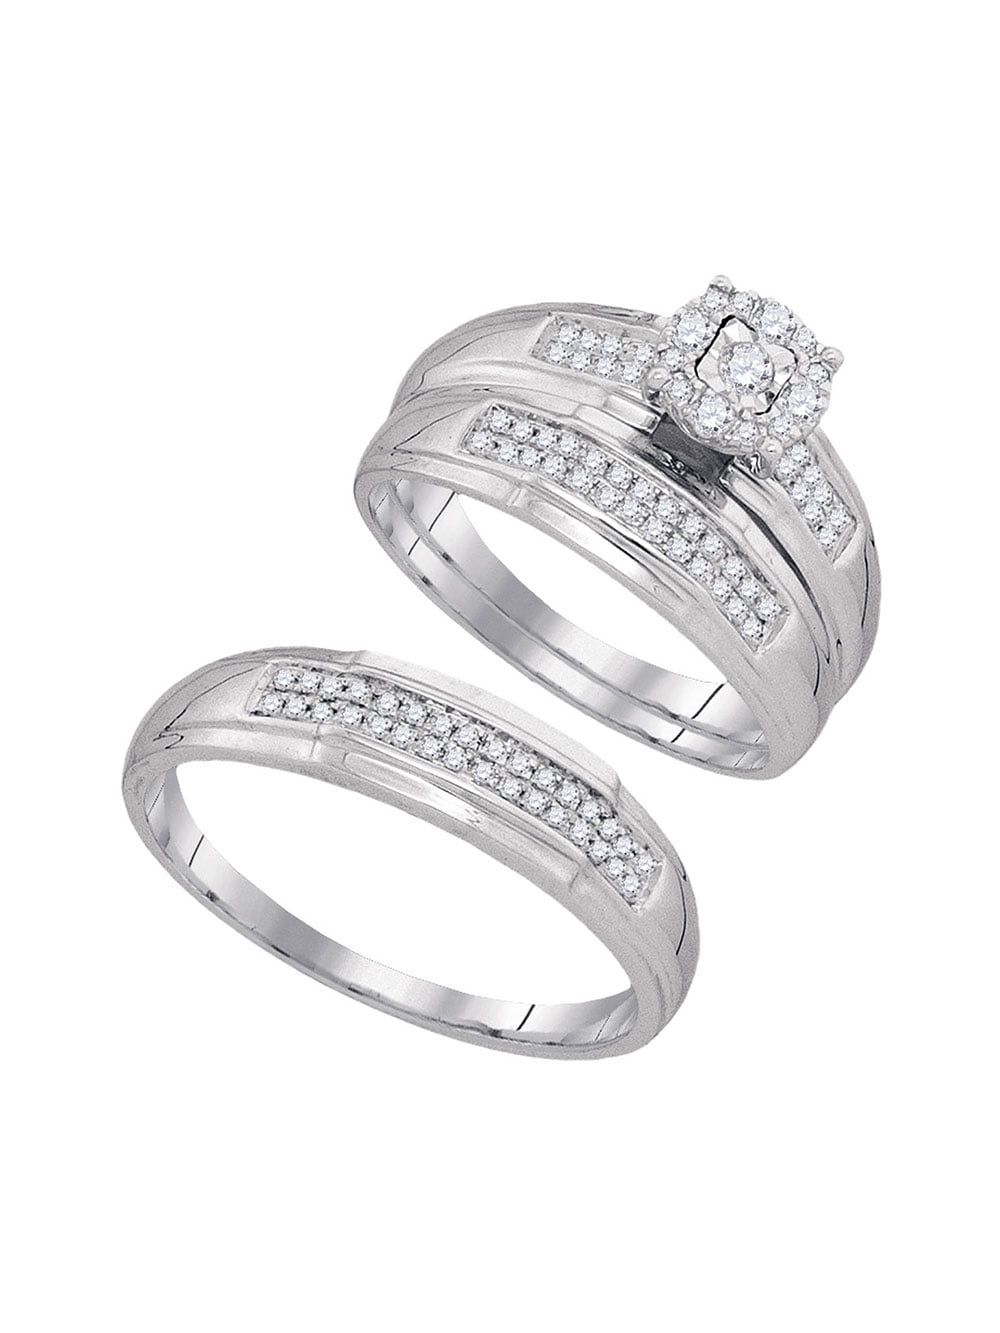 Solid 10k White Gold His And Hers Round Diamond Solitaire Matching